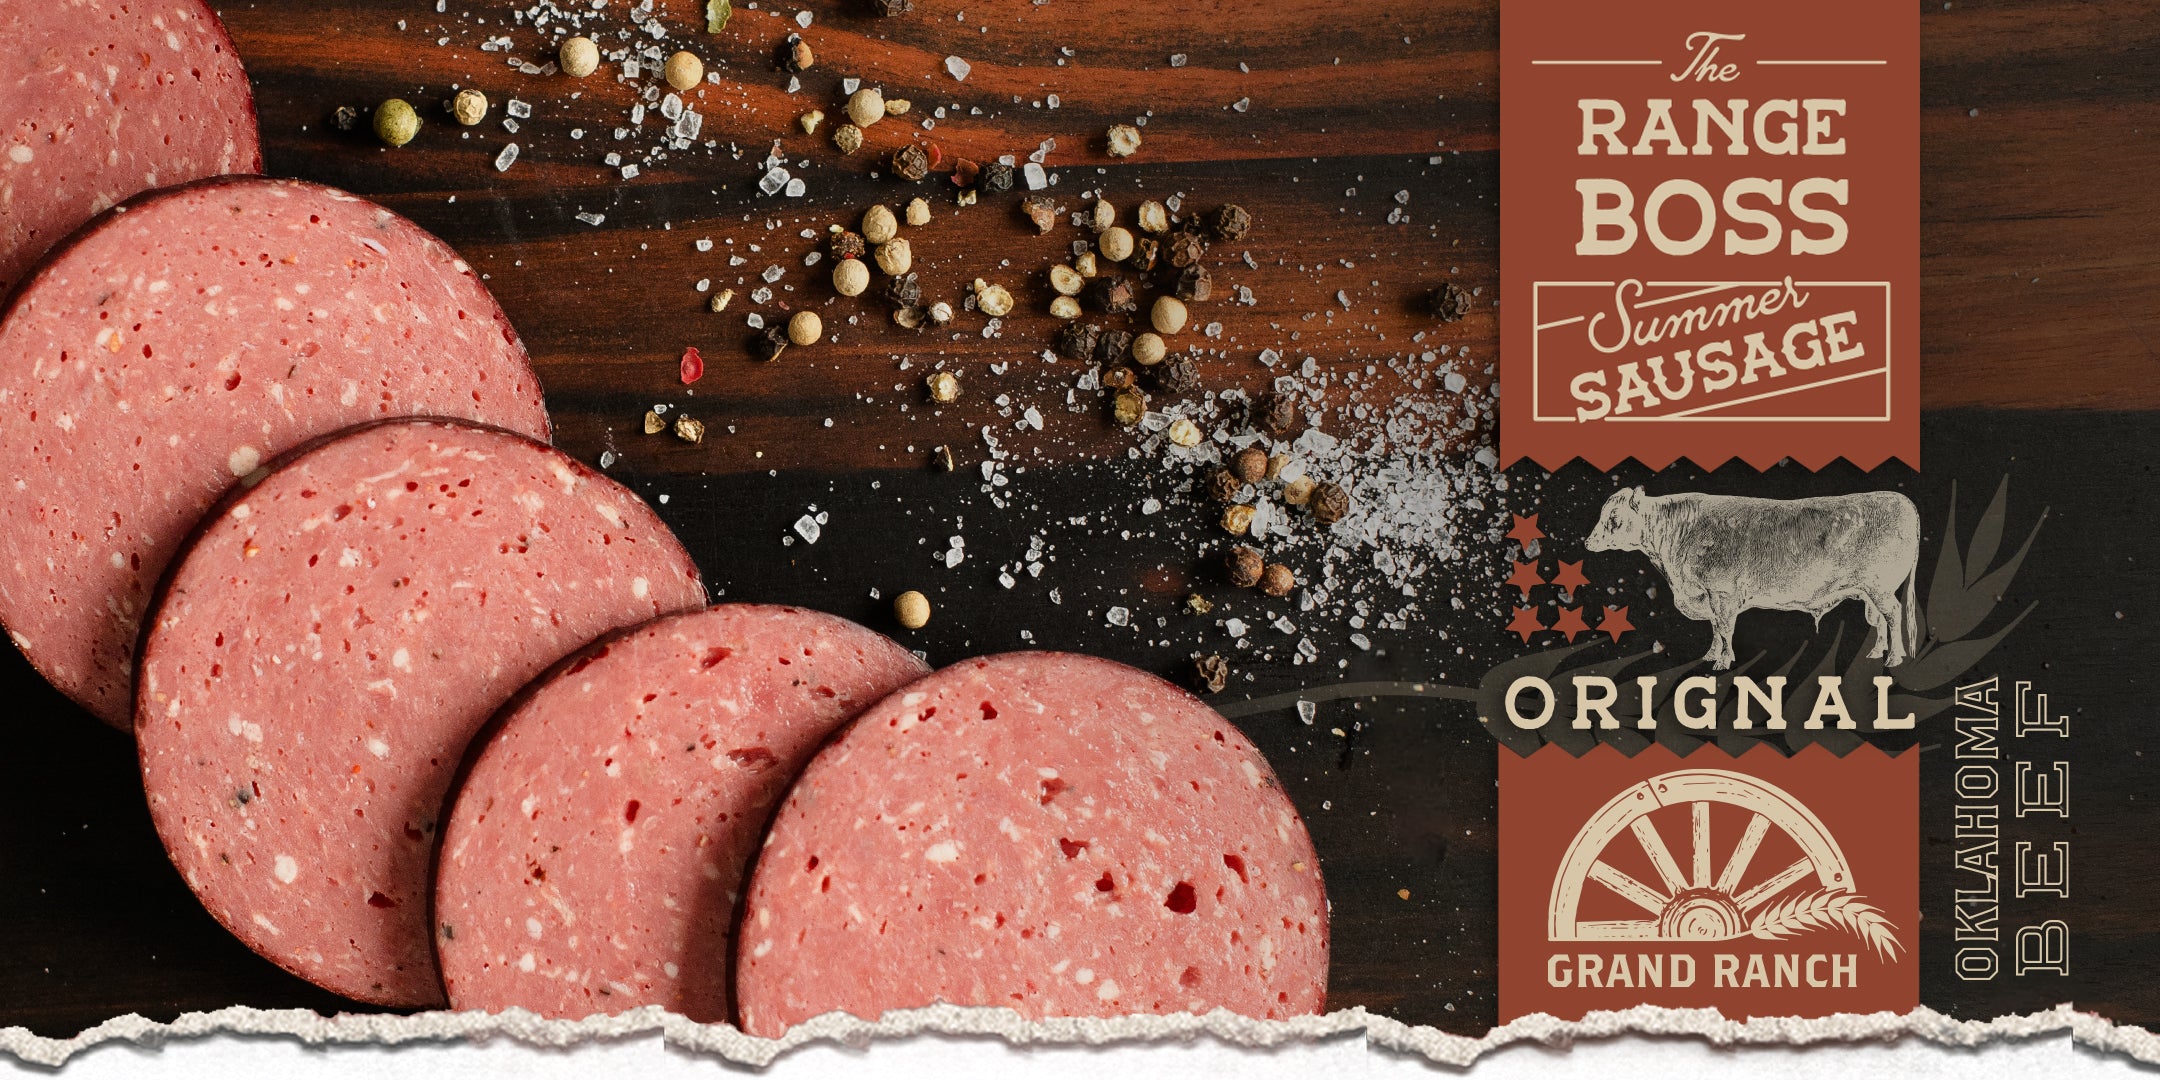 The Range Boss, Summer Sausage by Grand Ranch. Oklahoma Beef tastes Best! 